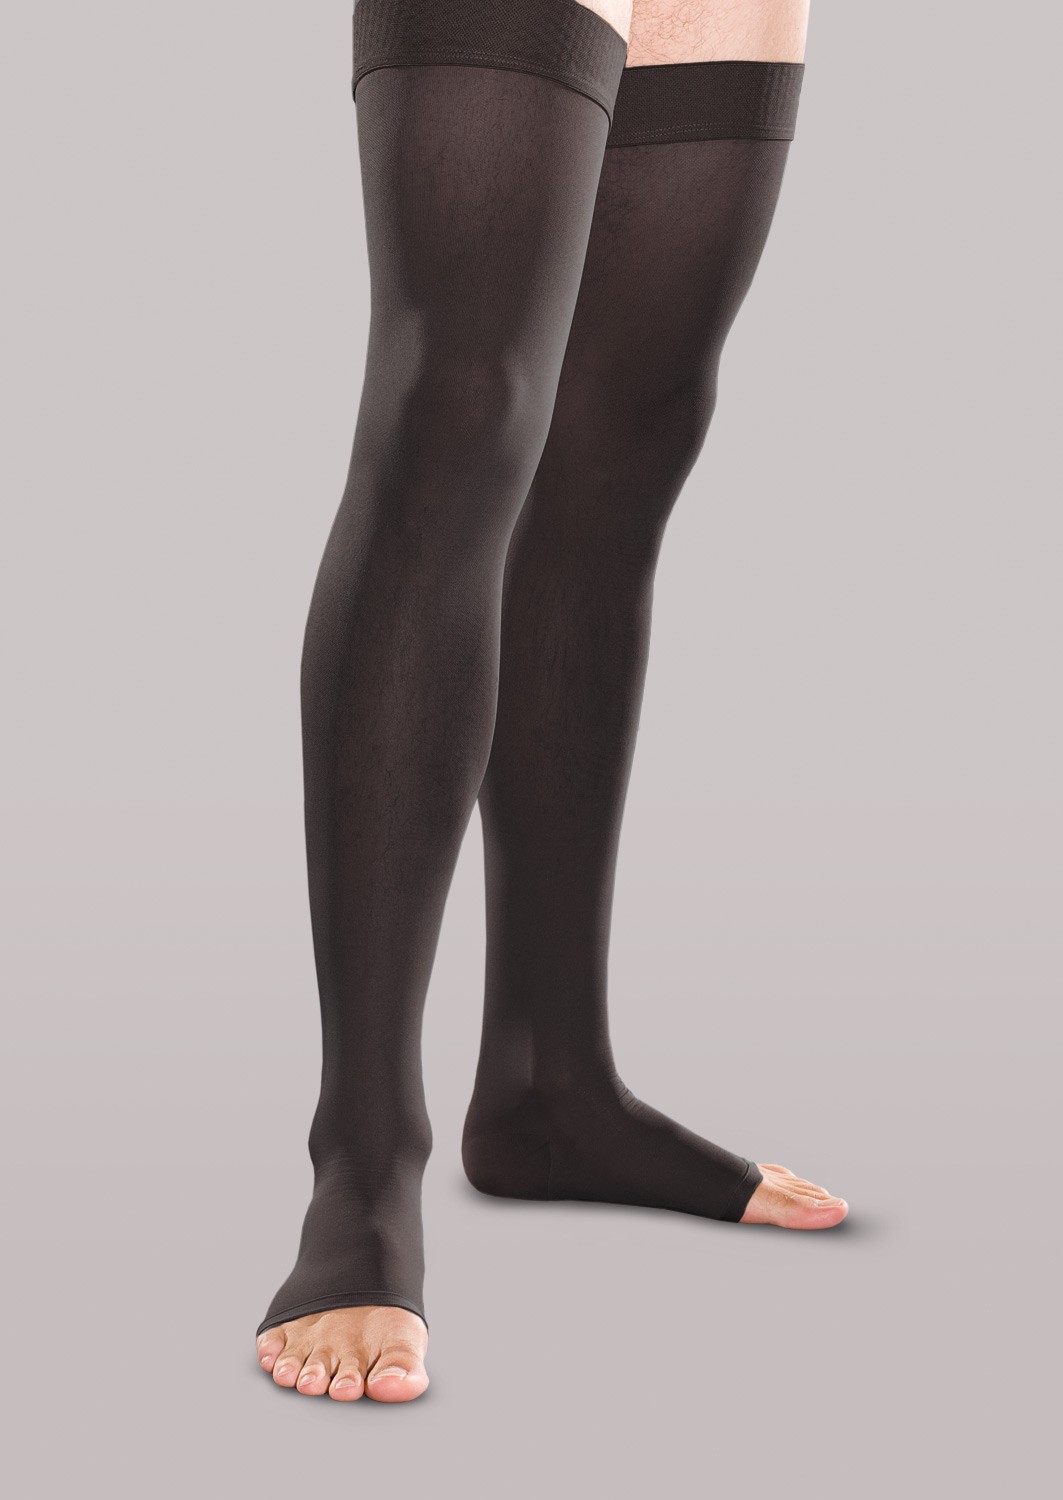 Firm Support Thigh High Open-Toe Stockings